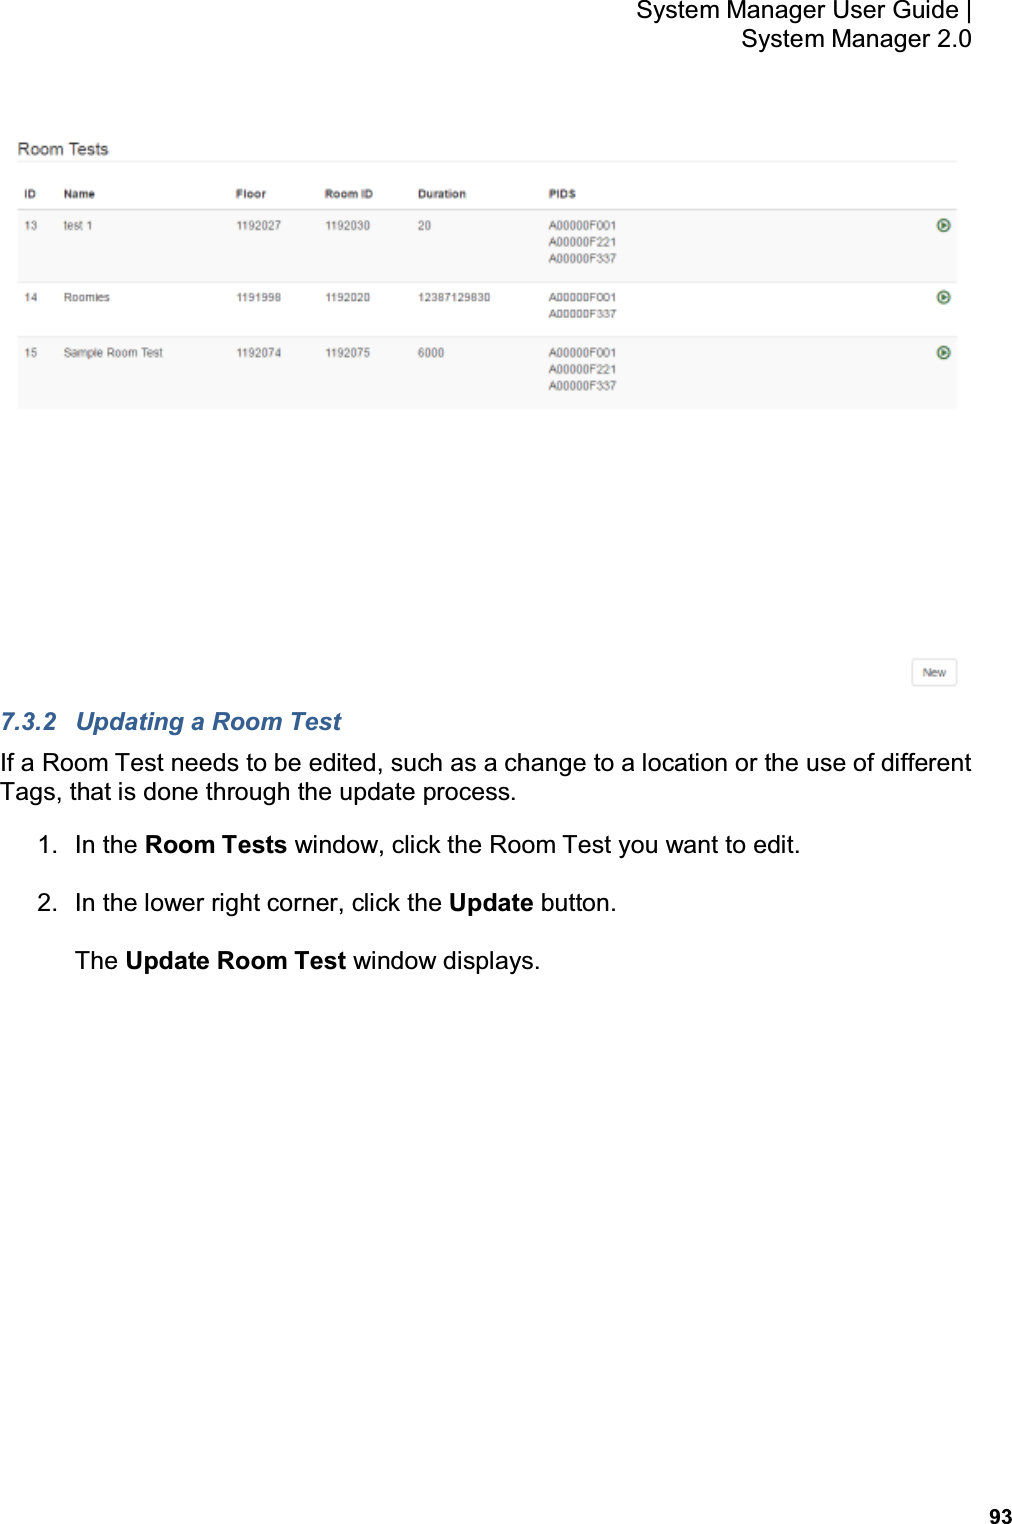           93 System Manager User Guide |  System Manager 2.0  7.3.2  Updating a Room Test If a Room Test needs to be edited, such as a change to a location or the use of different Tags, that is done through the update process. 1.  In the Room Tests window, click the Room Test you want to edit. 2.  In the lower right corner, click the Update button. The Update Room Test window displays. 